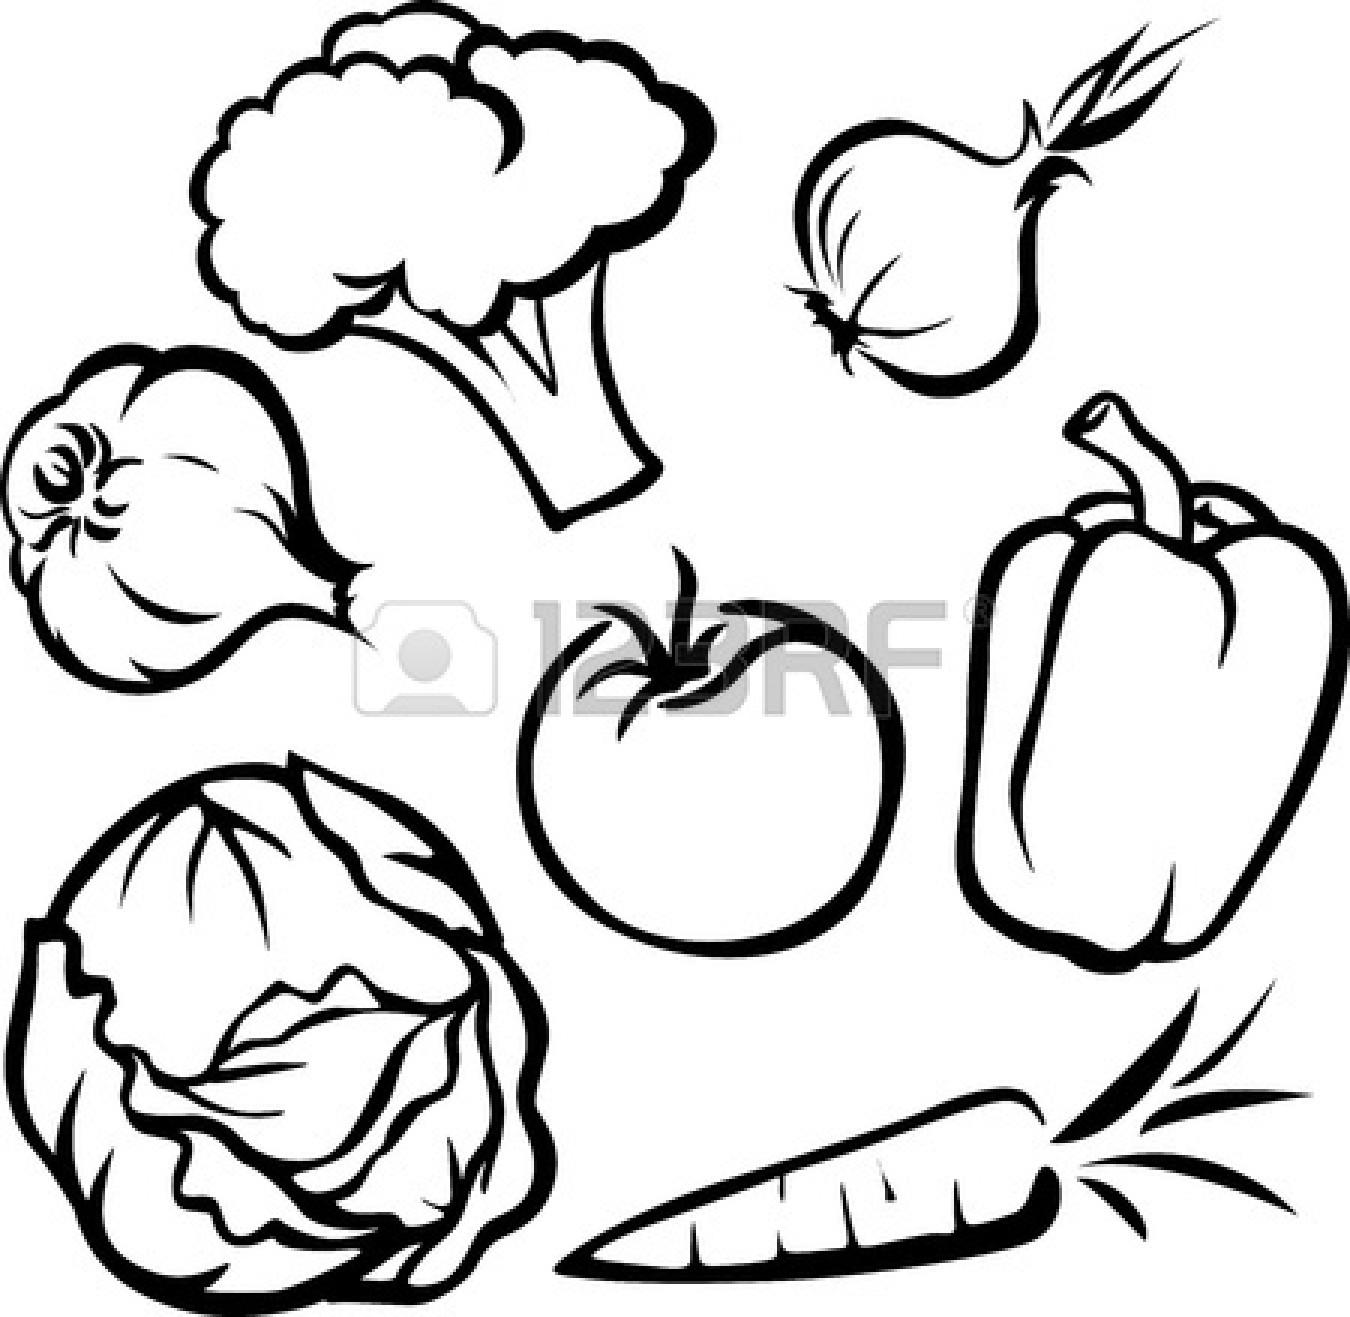 Vegetable Plant Clipart Black And White | Clipart Panda - Free ...